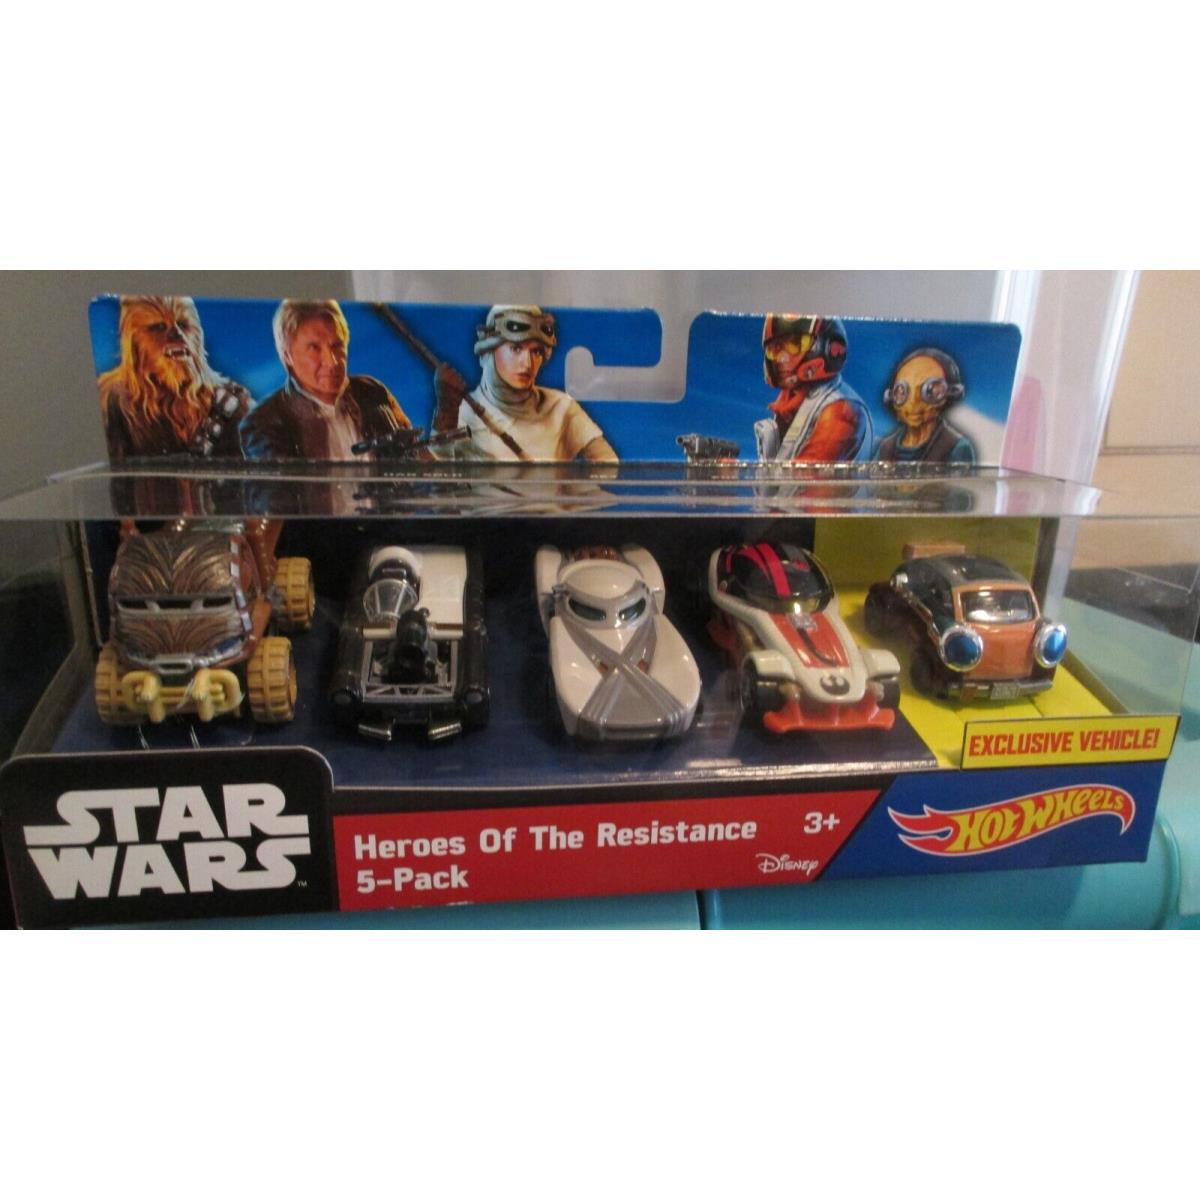 Hot Wheels 2015 Star Wars Heroes Of The Resistance 5-Pack Themed Cars 1/64